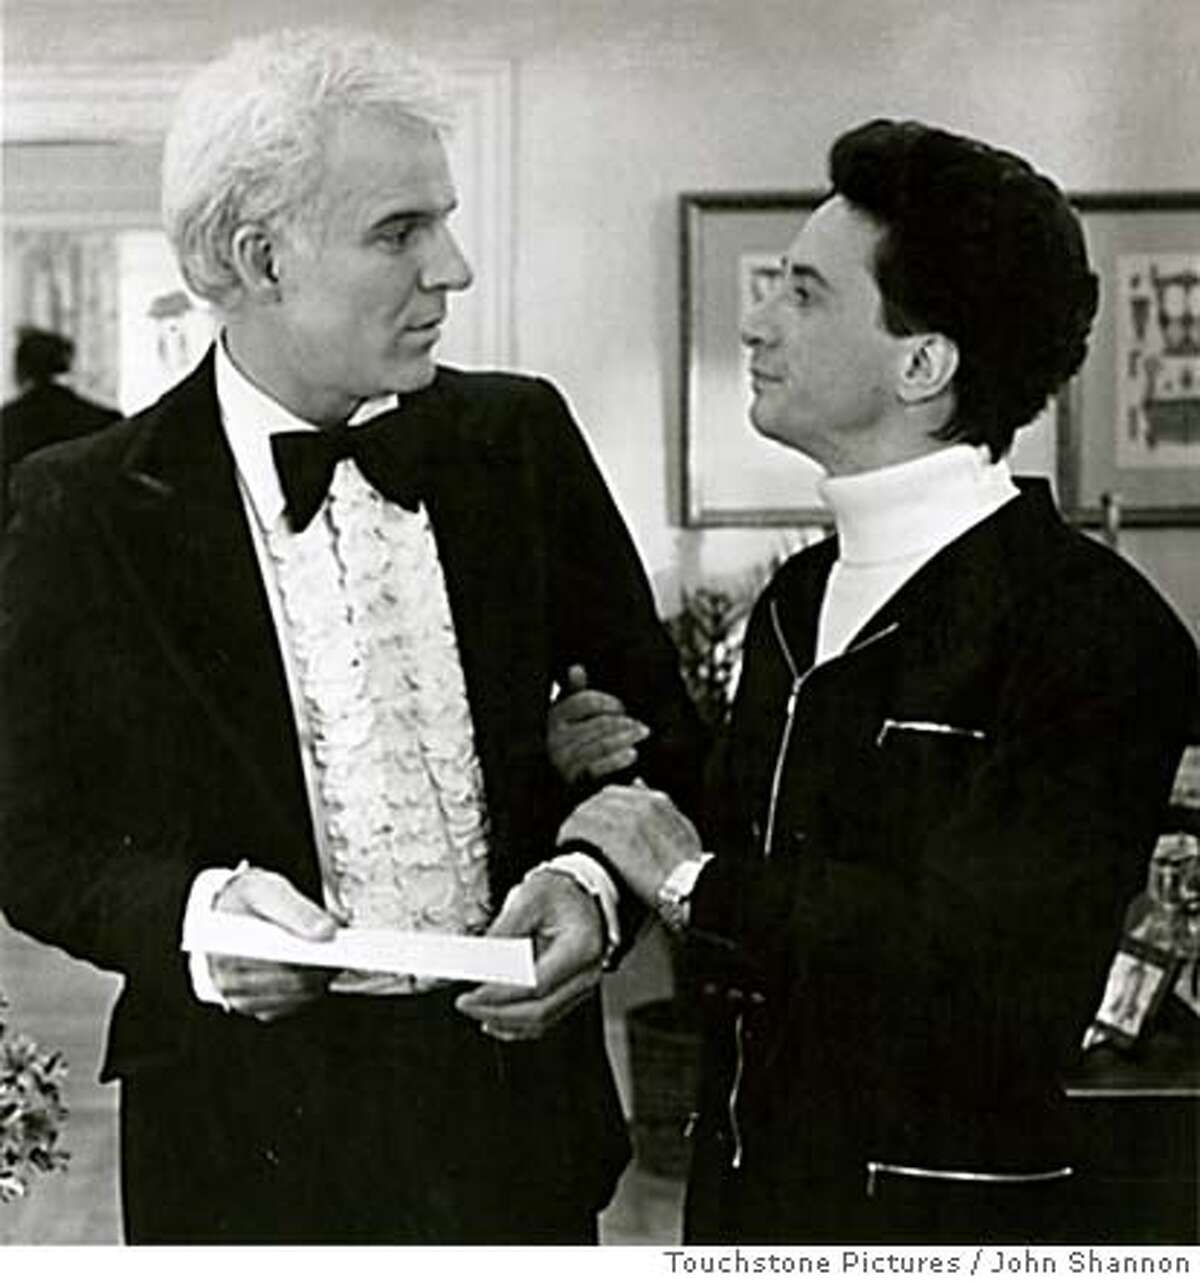 Steve Martin (left) plays George and Martin Short plays Franck the flamboyant and officious wedding planner in "Father of the Bride."